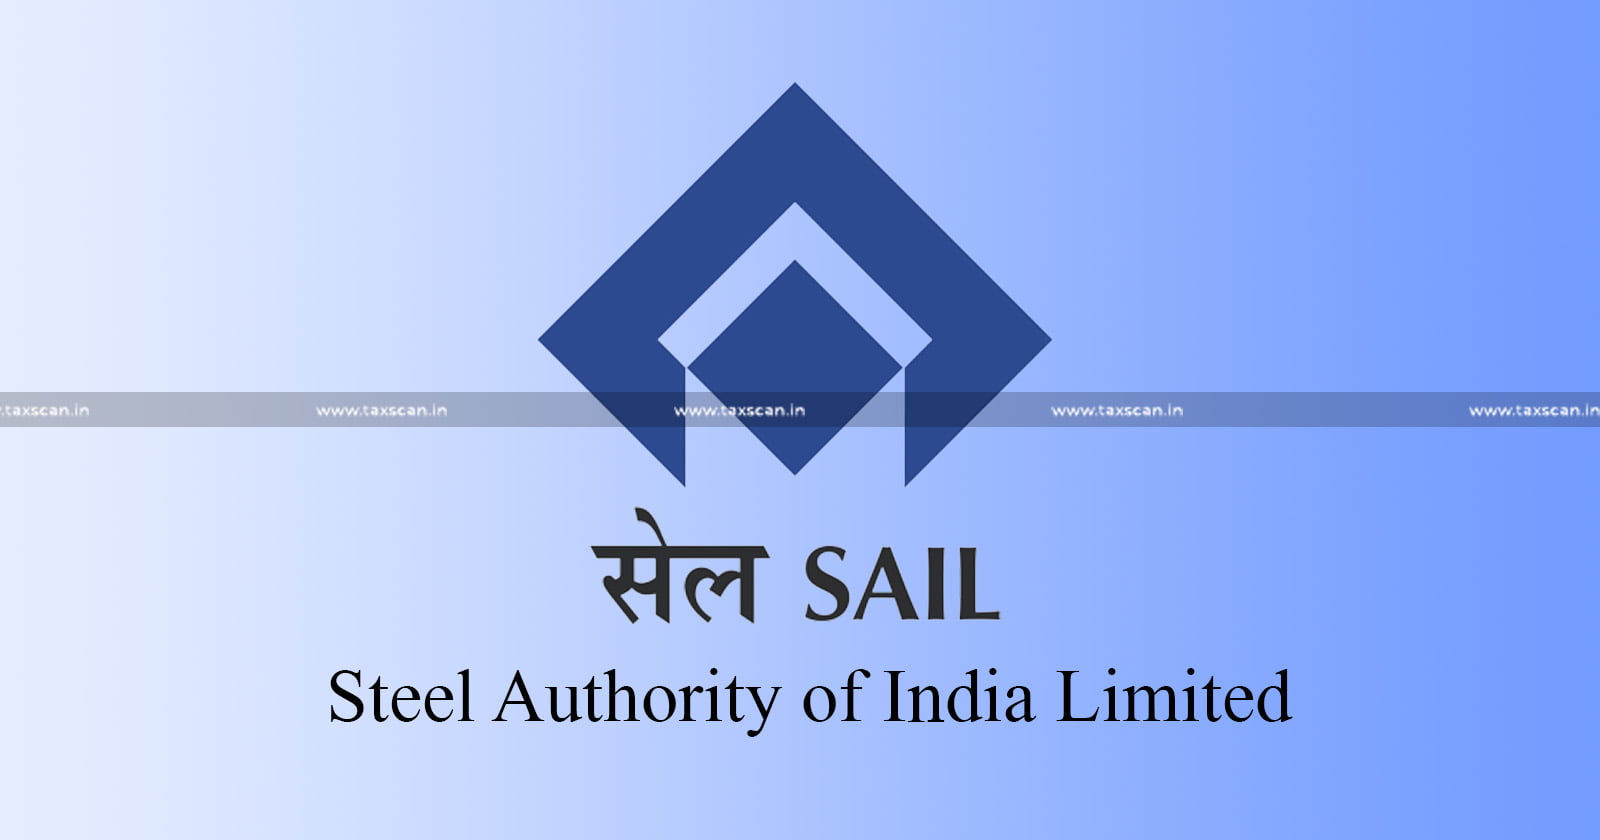 Excise Duty Demand - Steel is not Maintainable-CESTAT Rejects- Refund Claim of SAIL-TAXSCAN